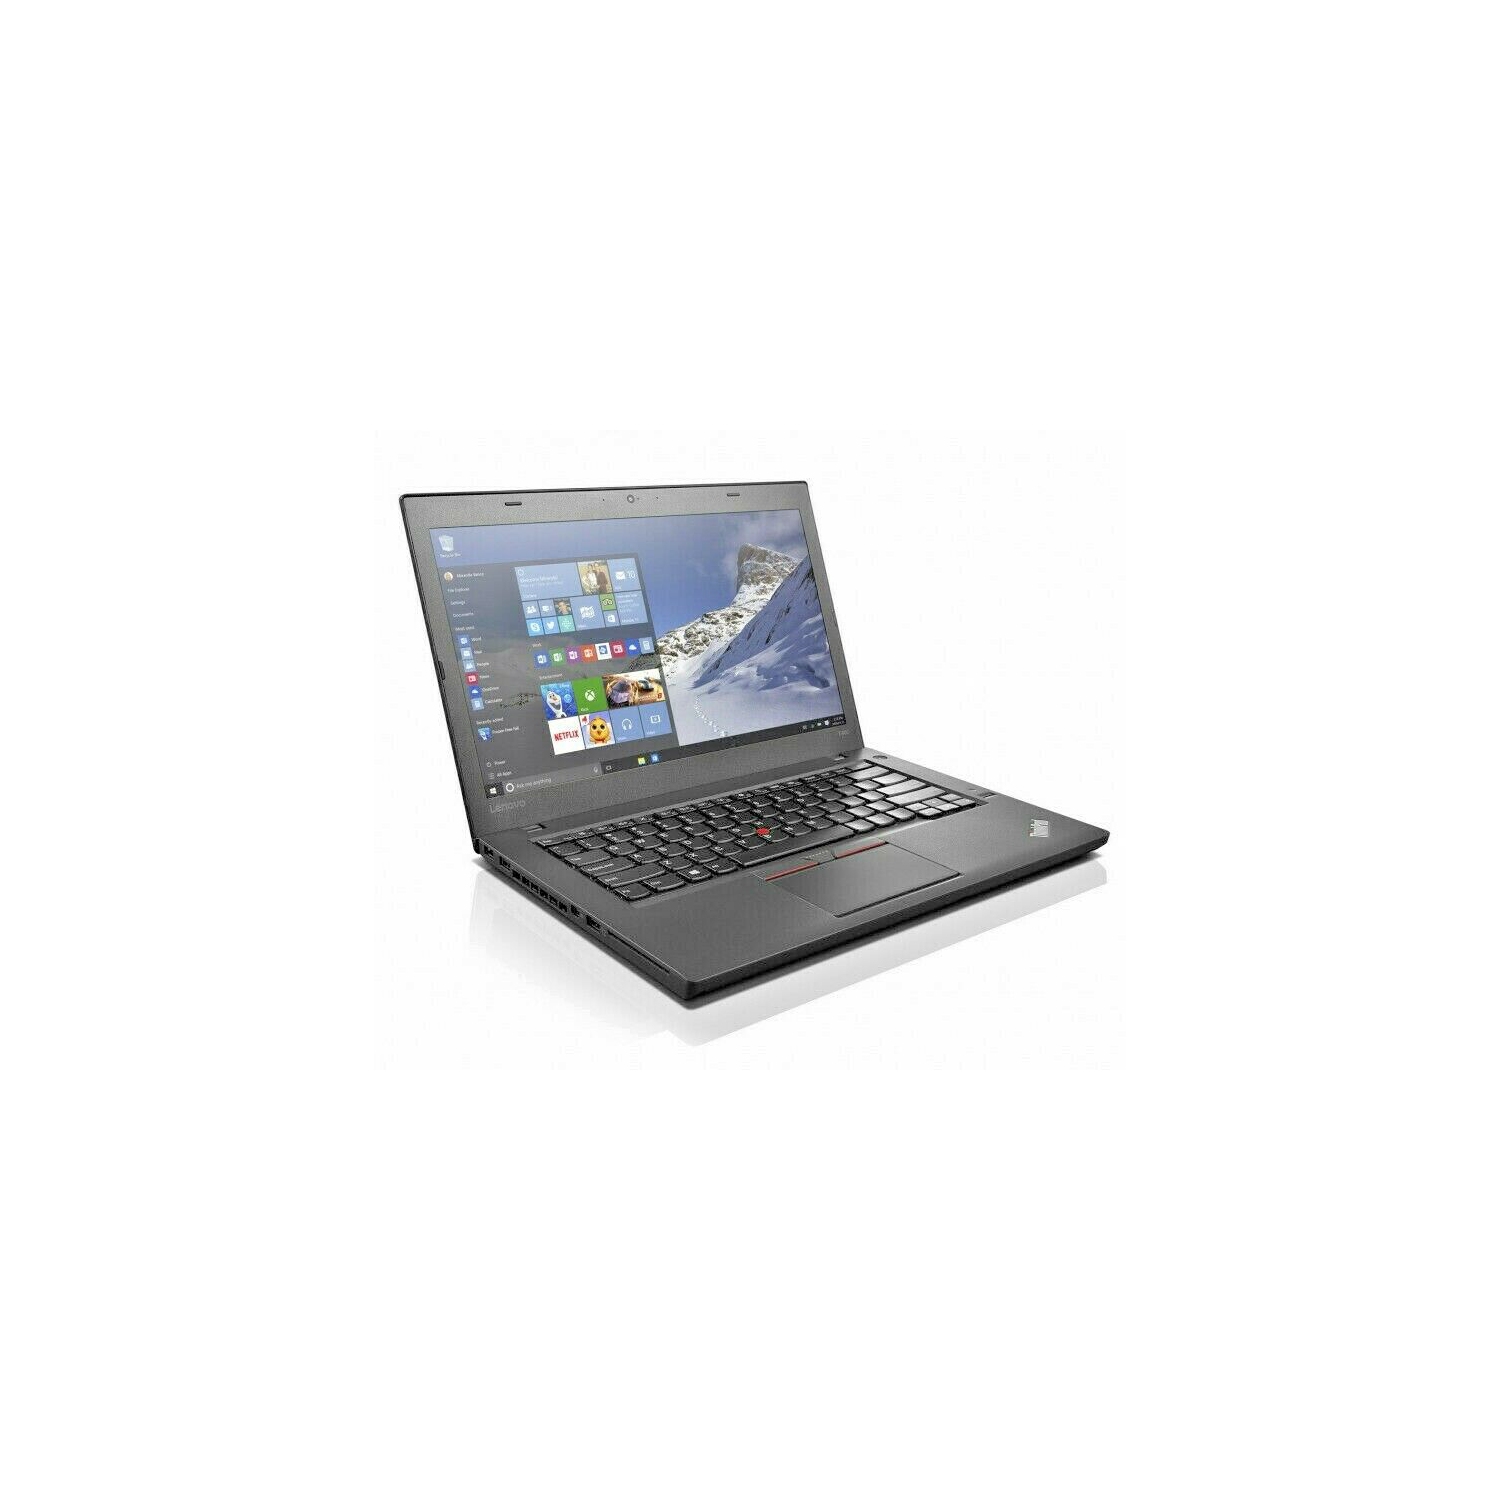 Refurbished (Excellent) - Lenovo T440 TOUCHSCREEN Core I5 4th gen / 8gb DDR3 / 256gb SSD / Windows 10 Pro Grade A, Excellent Condition! Free LIXSUNTEKÃ‚Â® Ethernet Cable